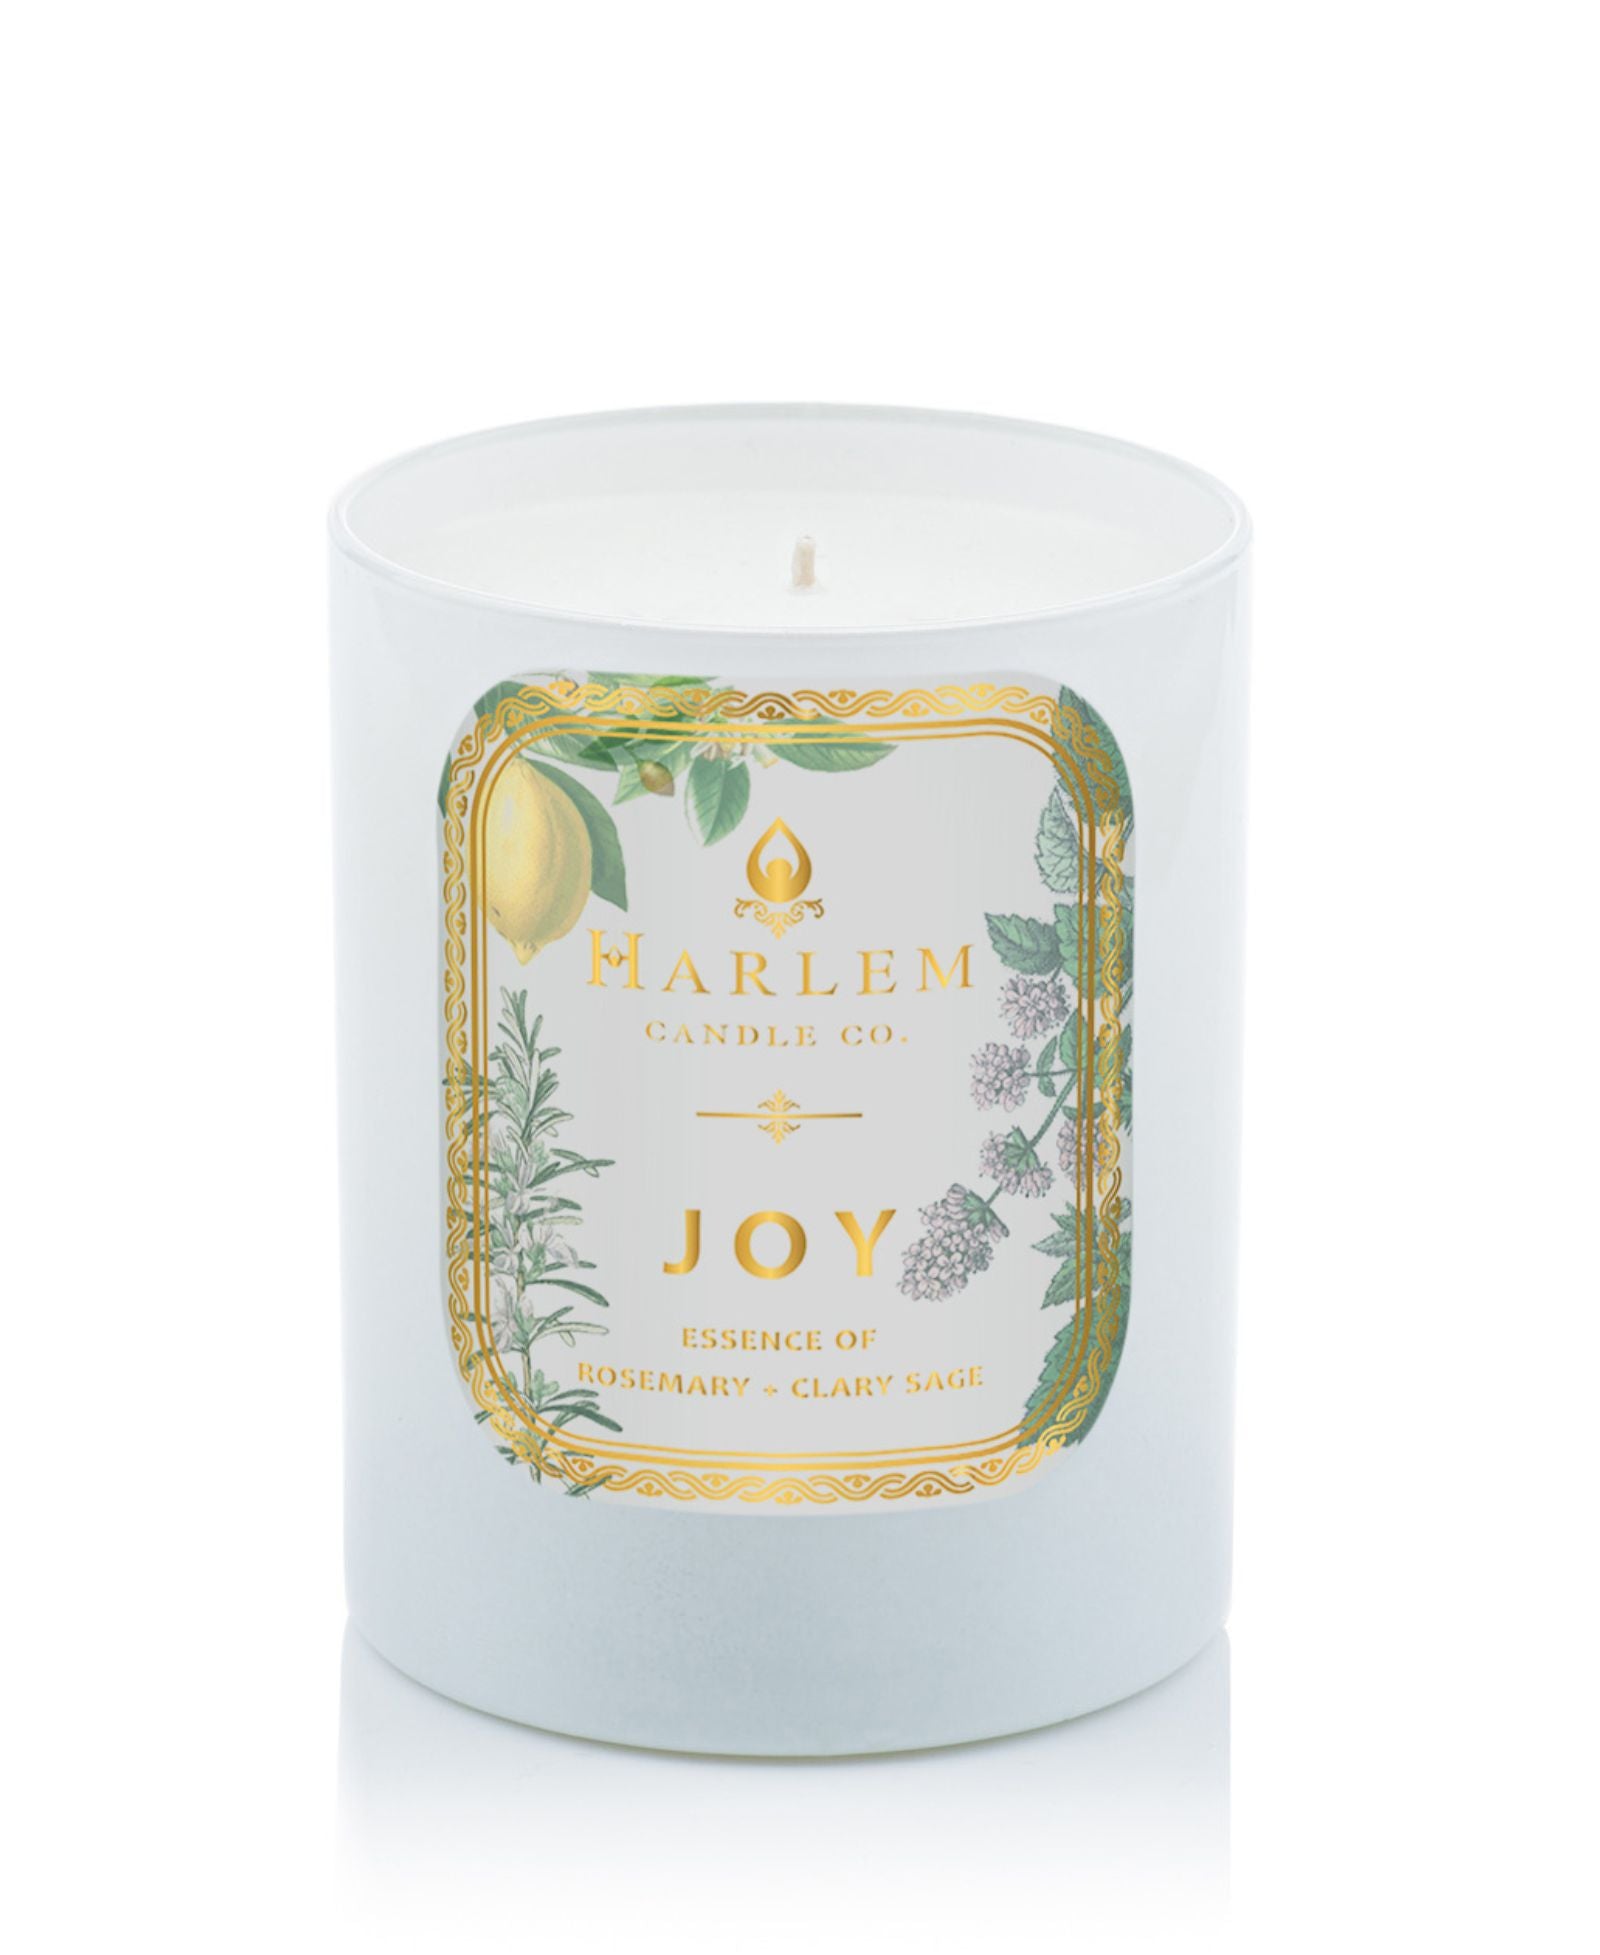 A photo of our Joy candle